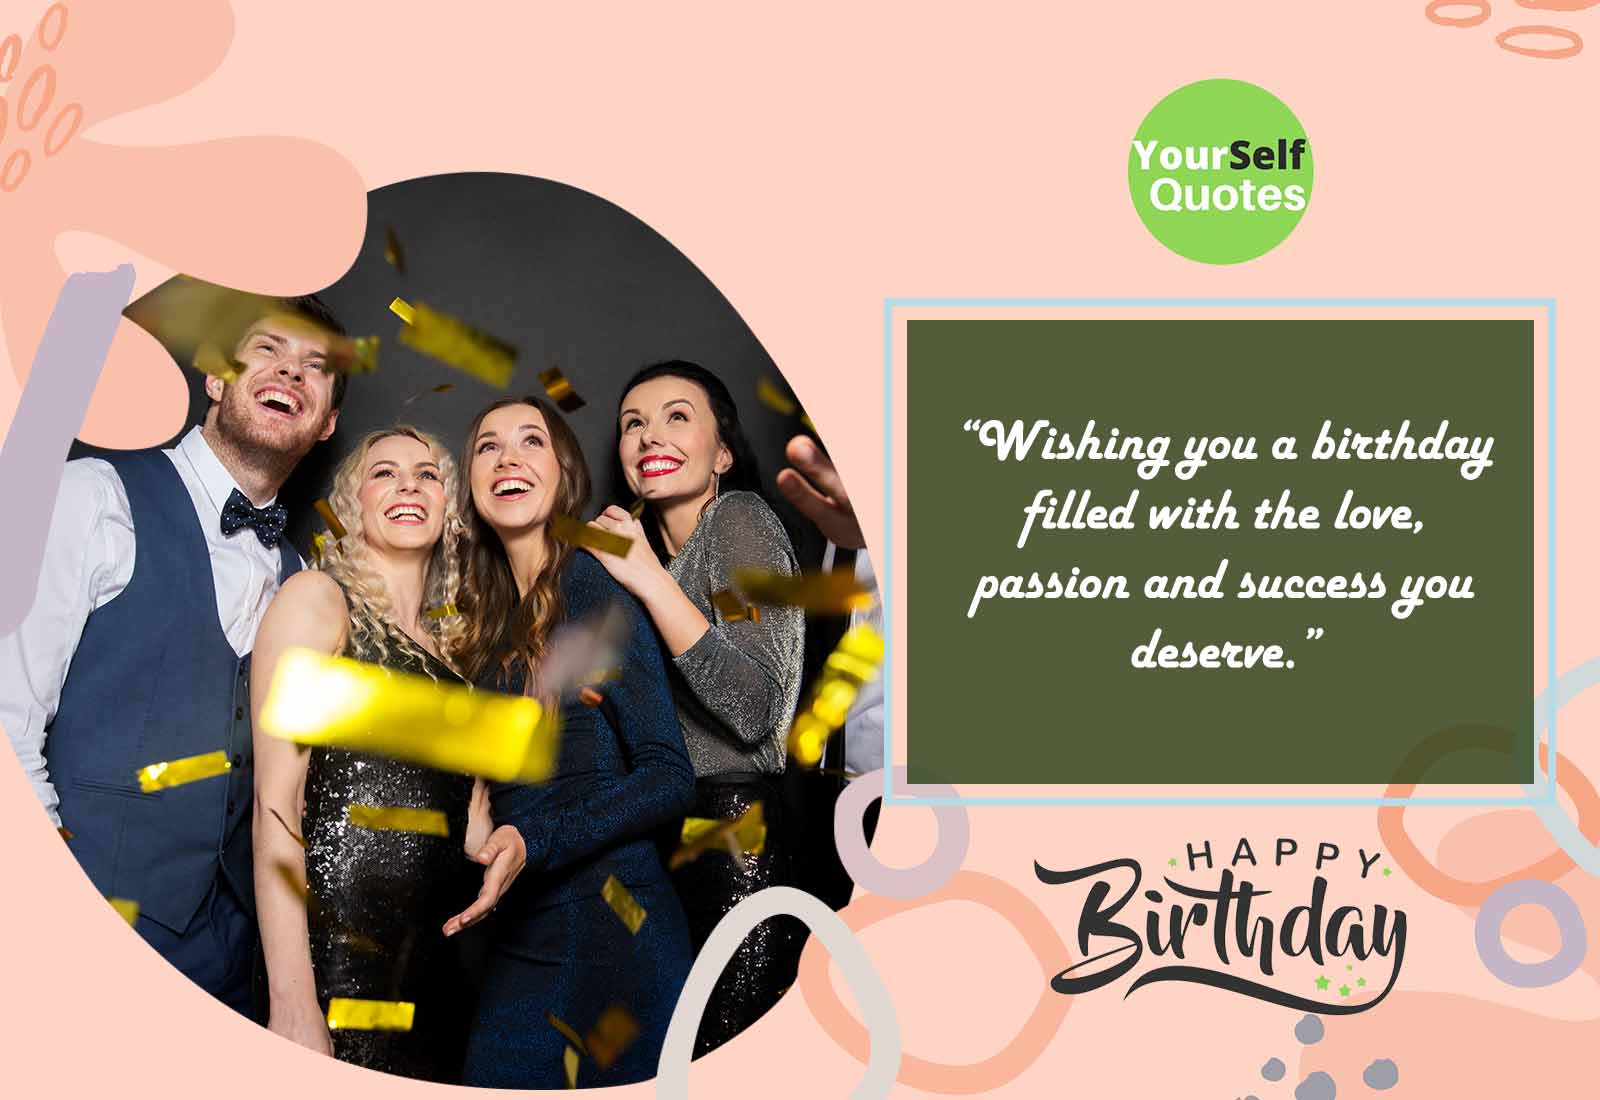 110 Happy Birthday Wishes Quotes For Friends, Family And Loved Ones